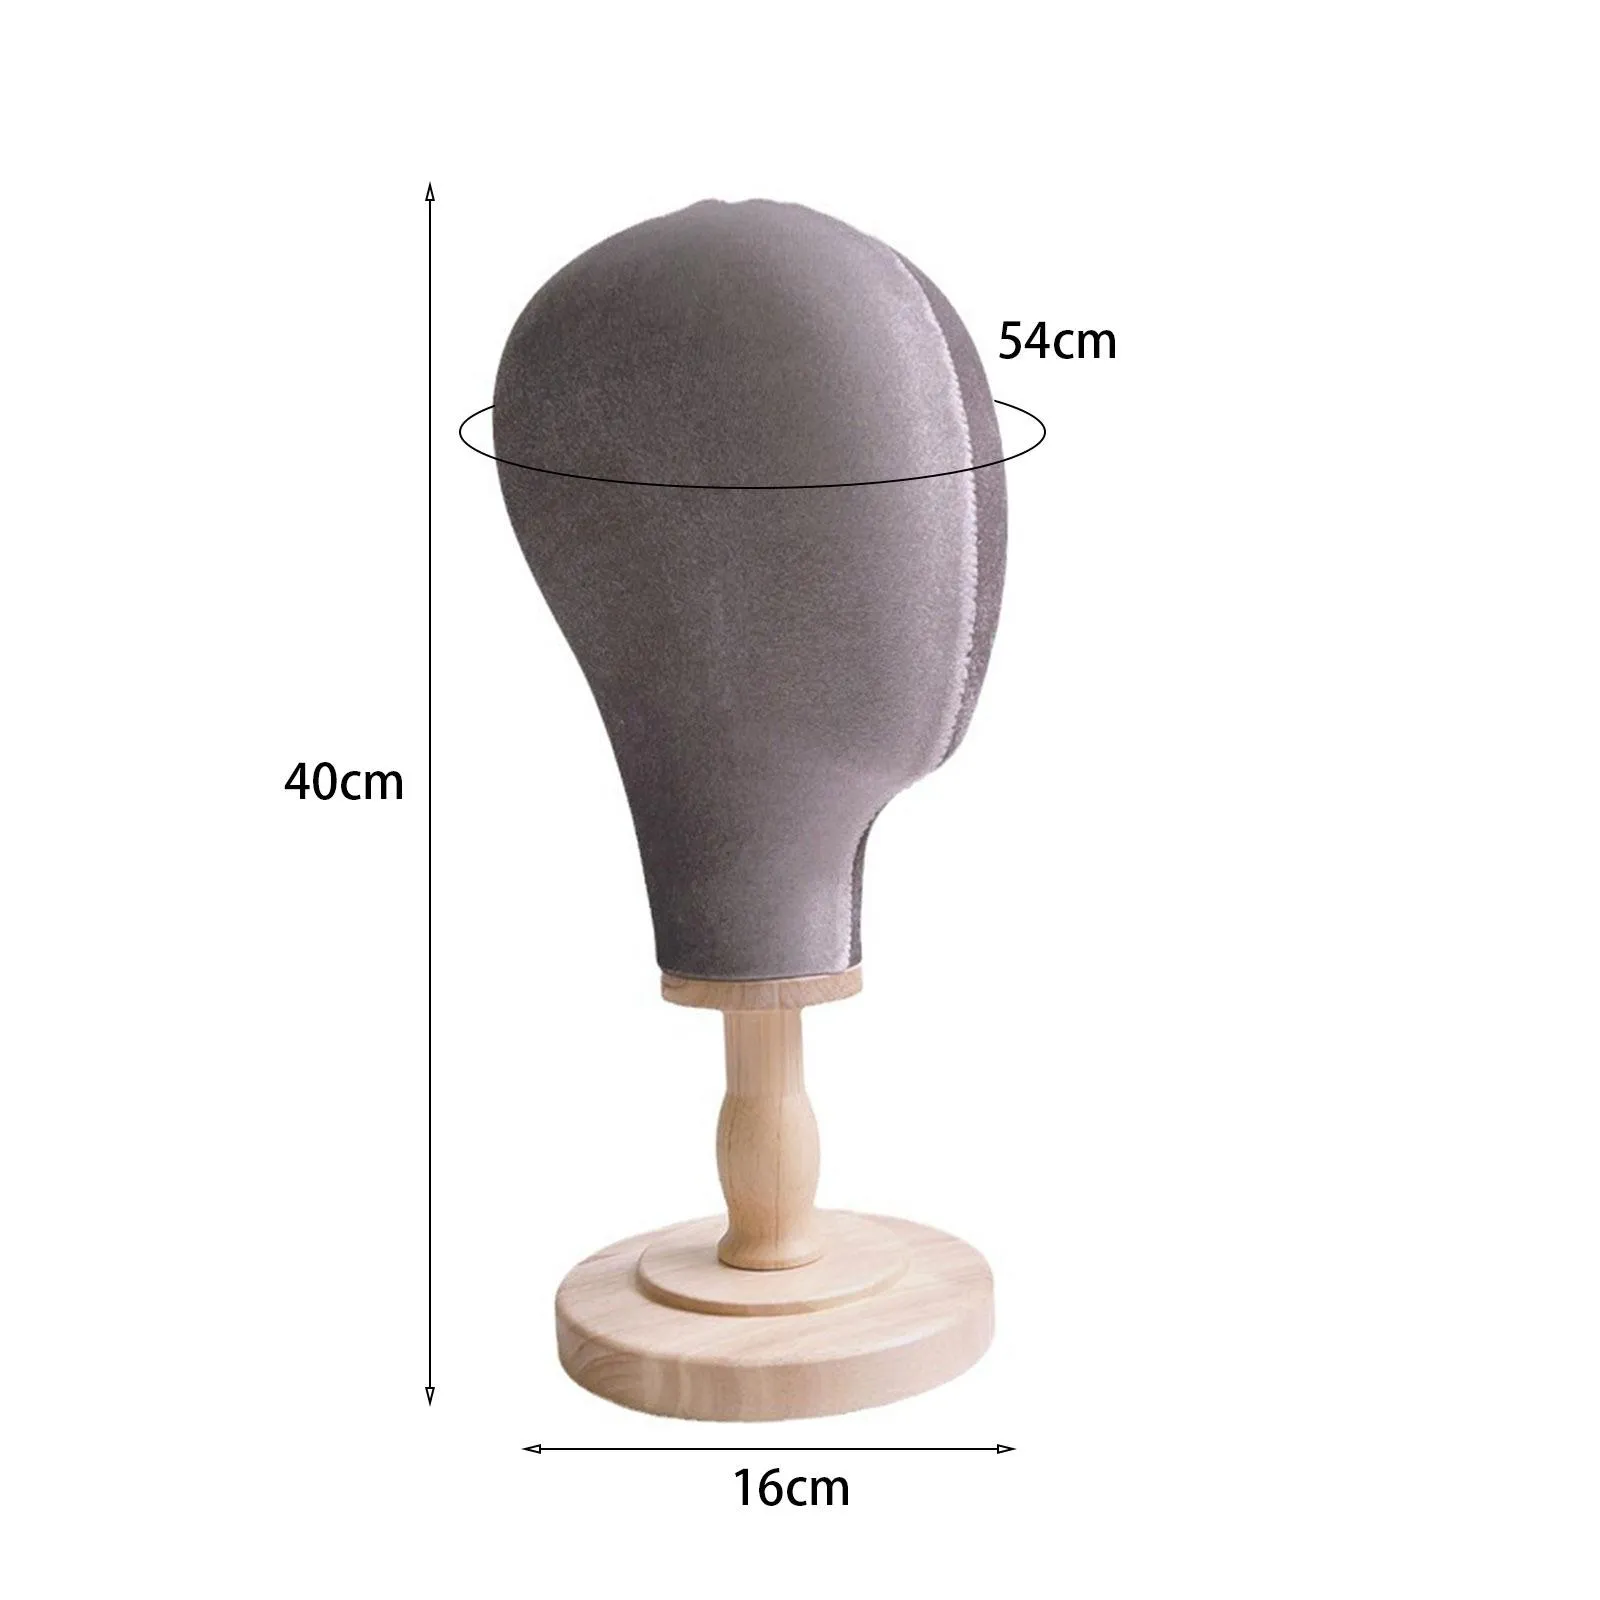 Mannequin Head Model Hat Holder Hat Display Head with Wood Base Caps Storage Rack for Headset Headphones Scarves Glasses Jewelry